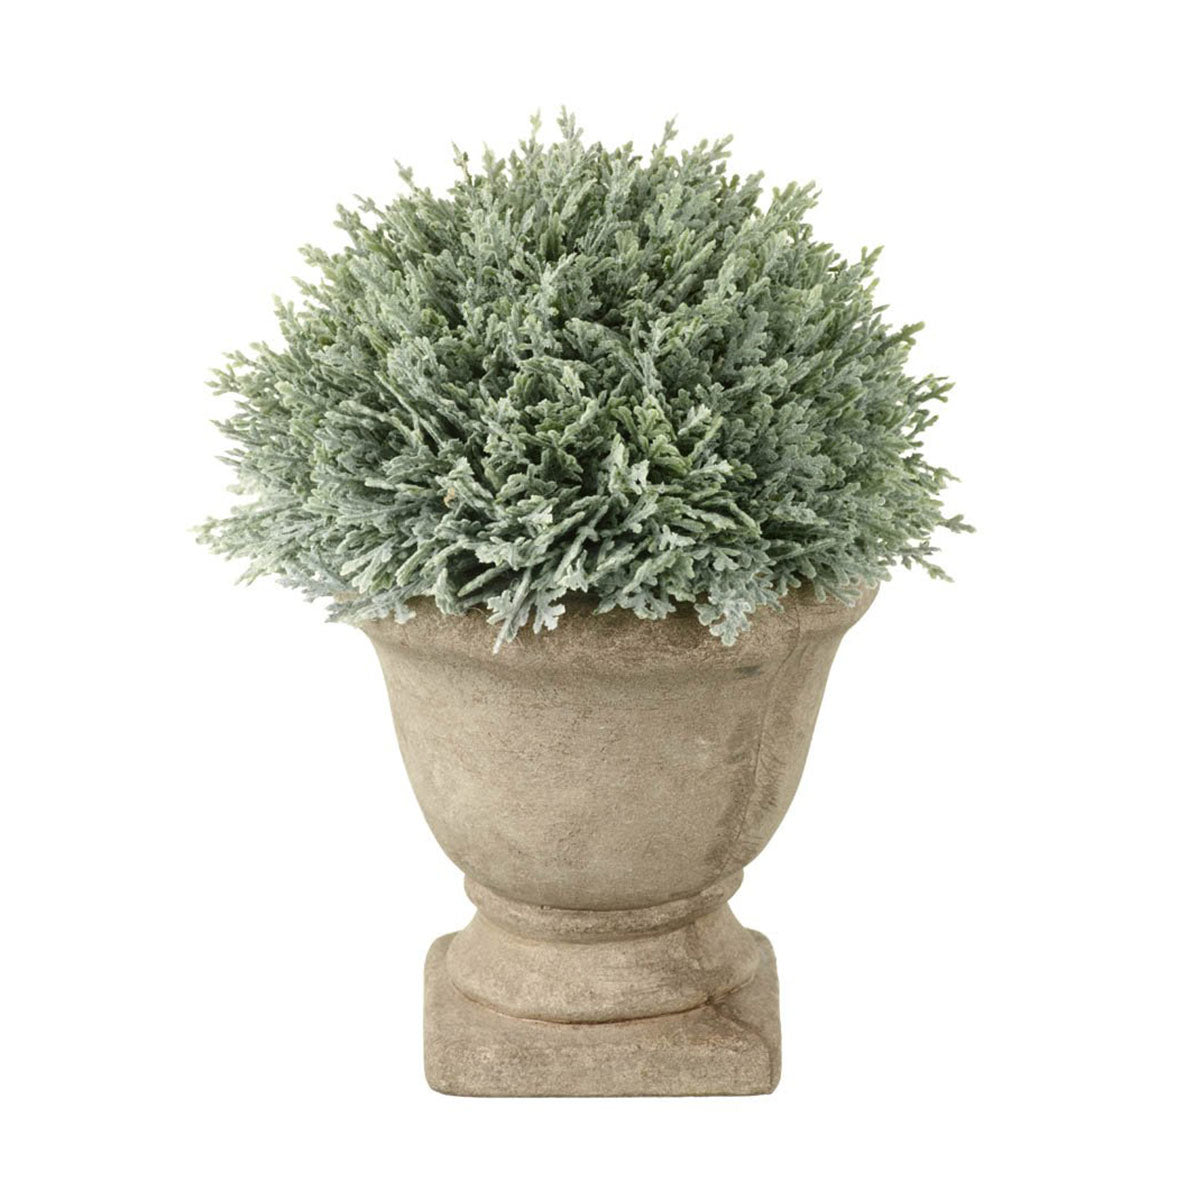 Cypress Potted H18x15cm Green Plant